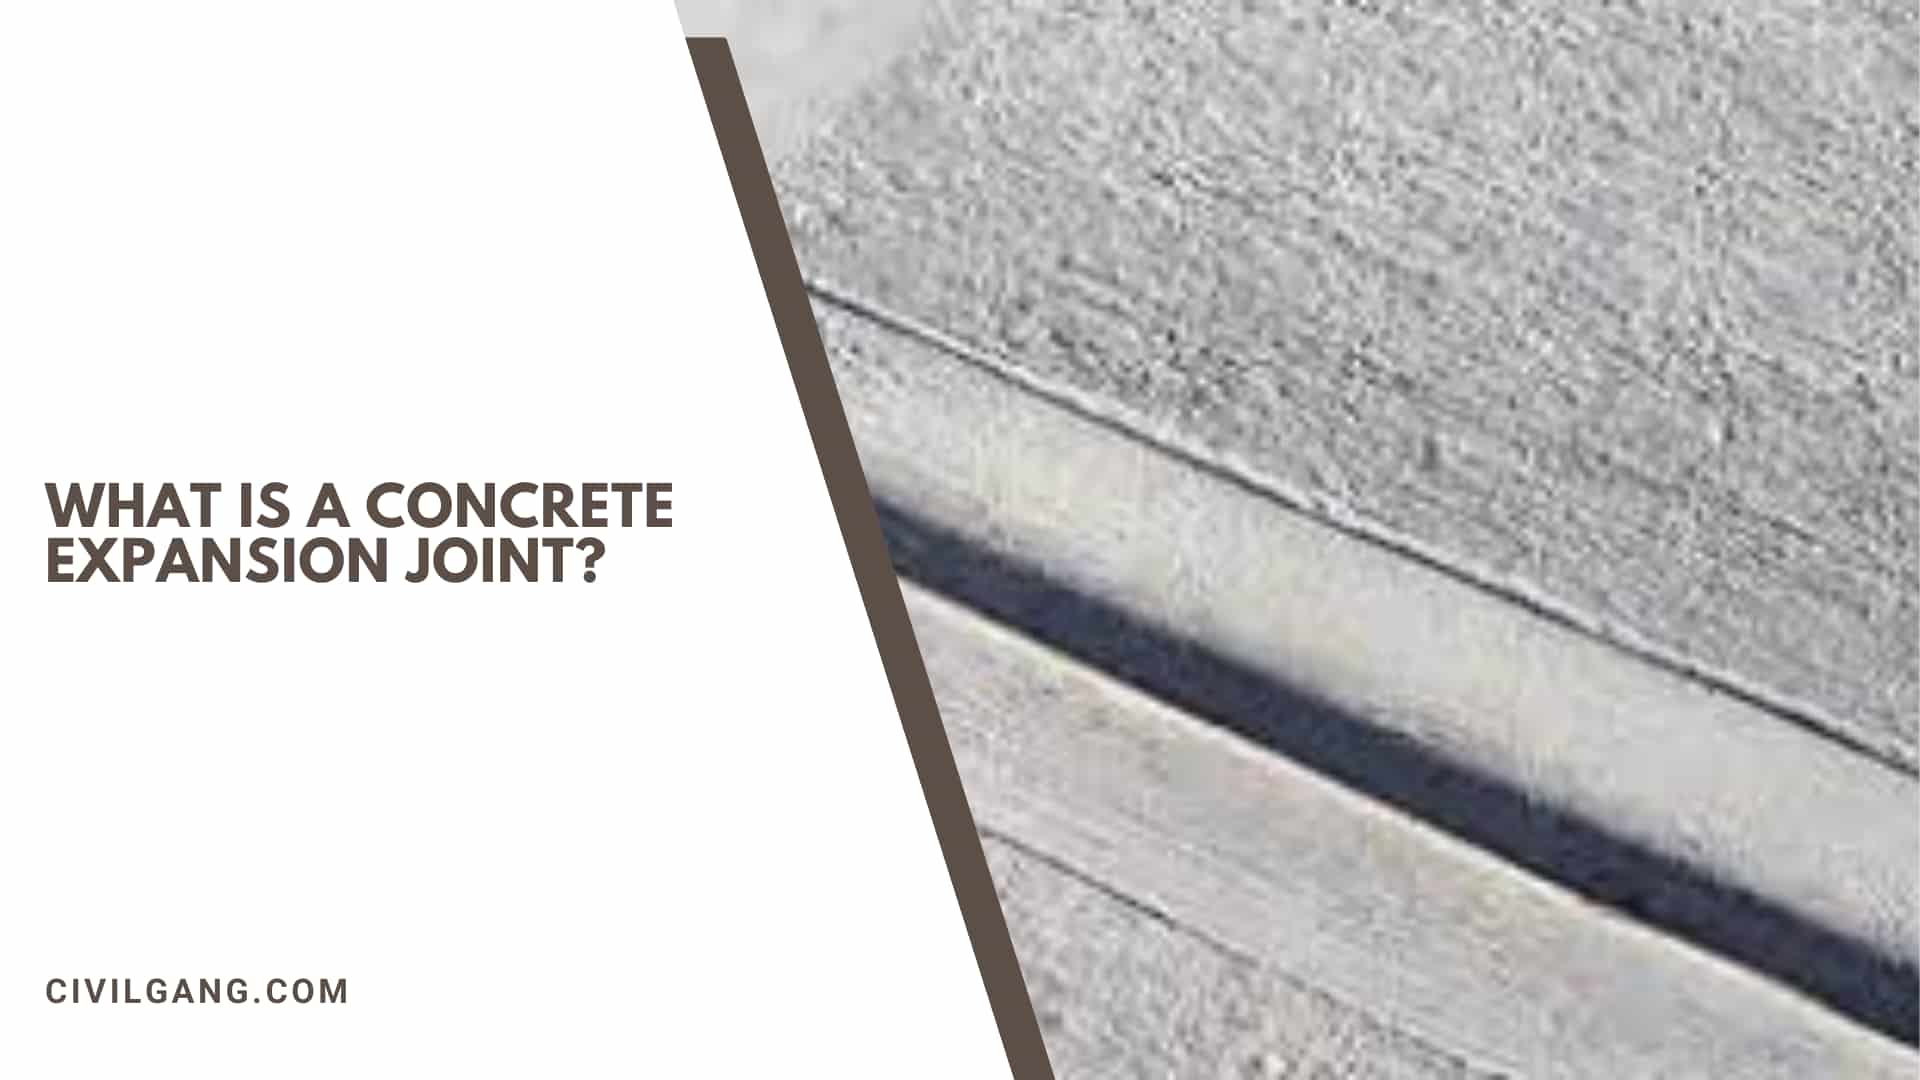 What Is a Concrete Expansion Joint?